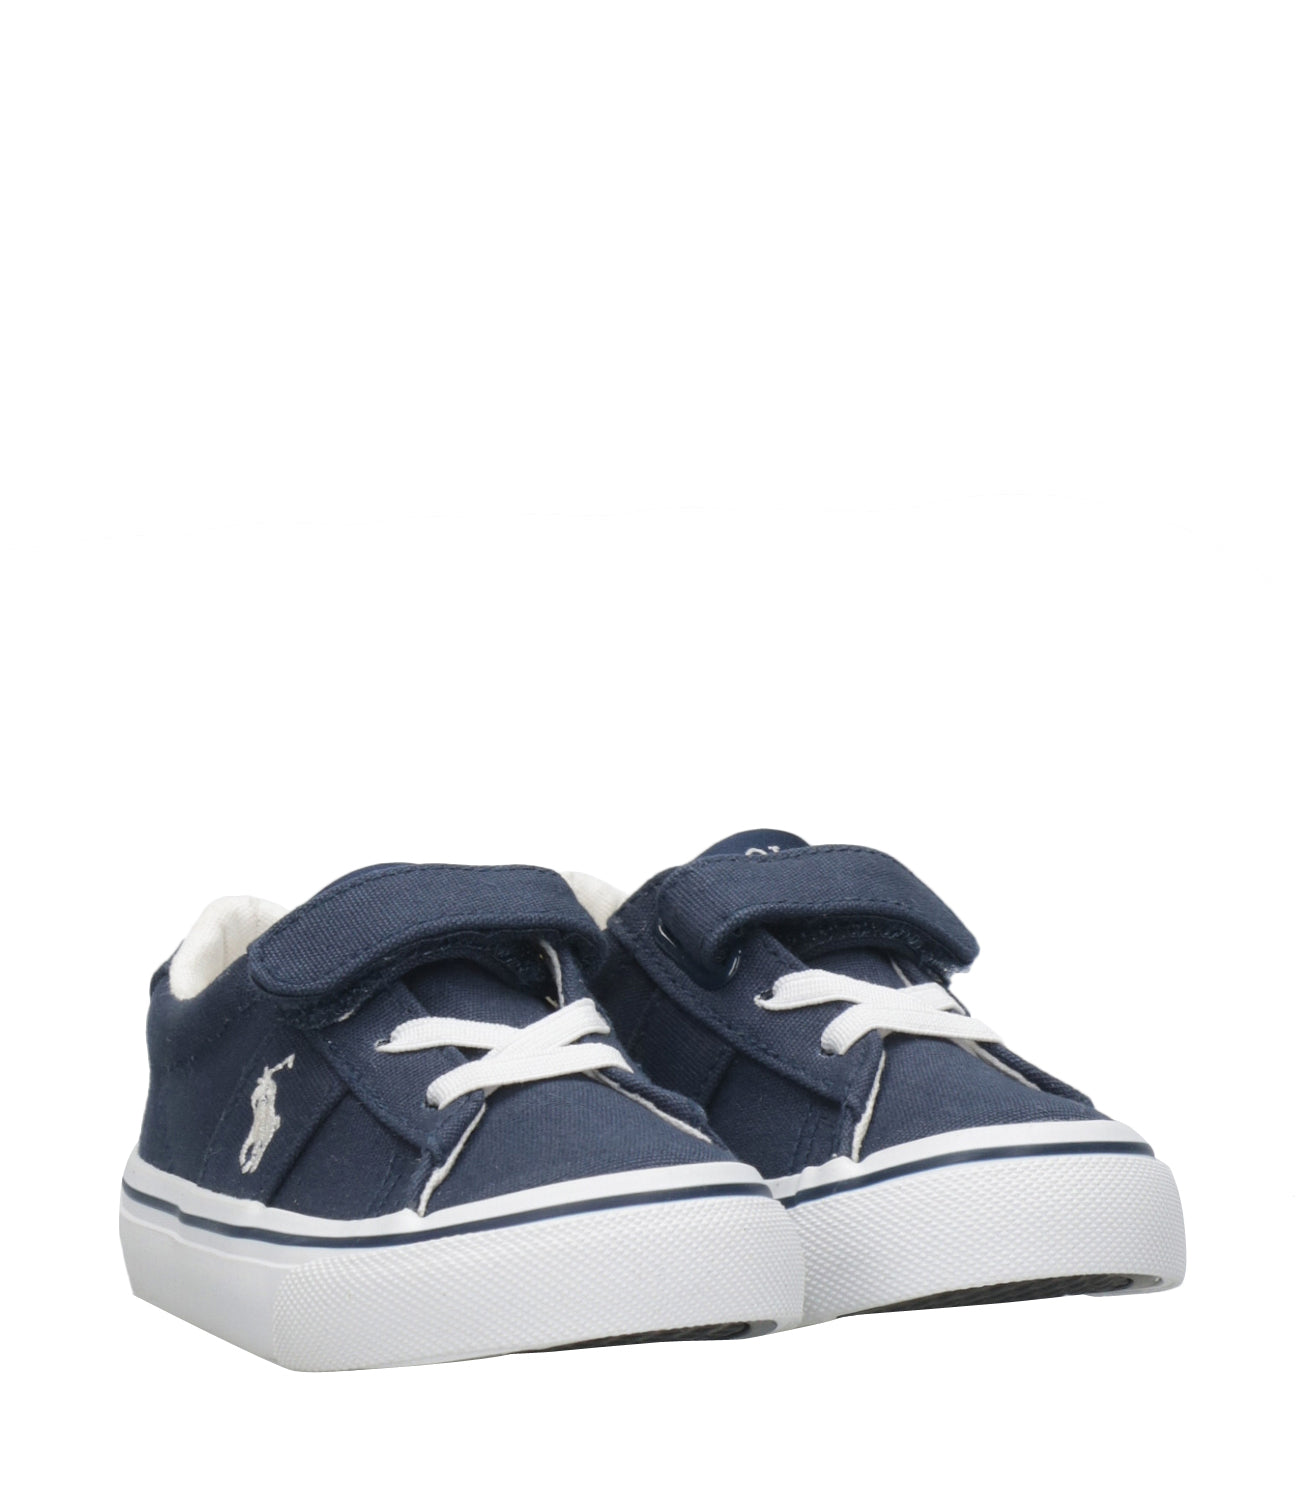 Ralph Lauren Childrenswear | Sneakers Sayer PS Navy Blue and White